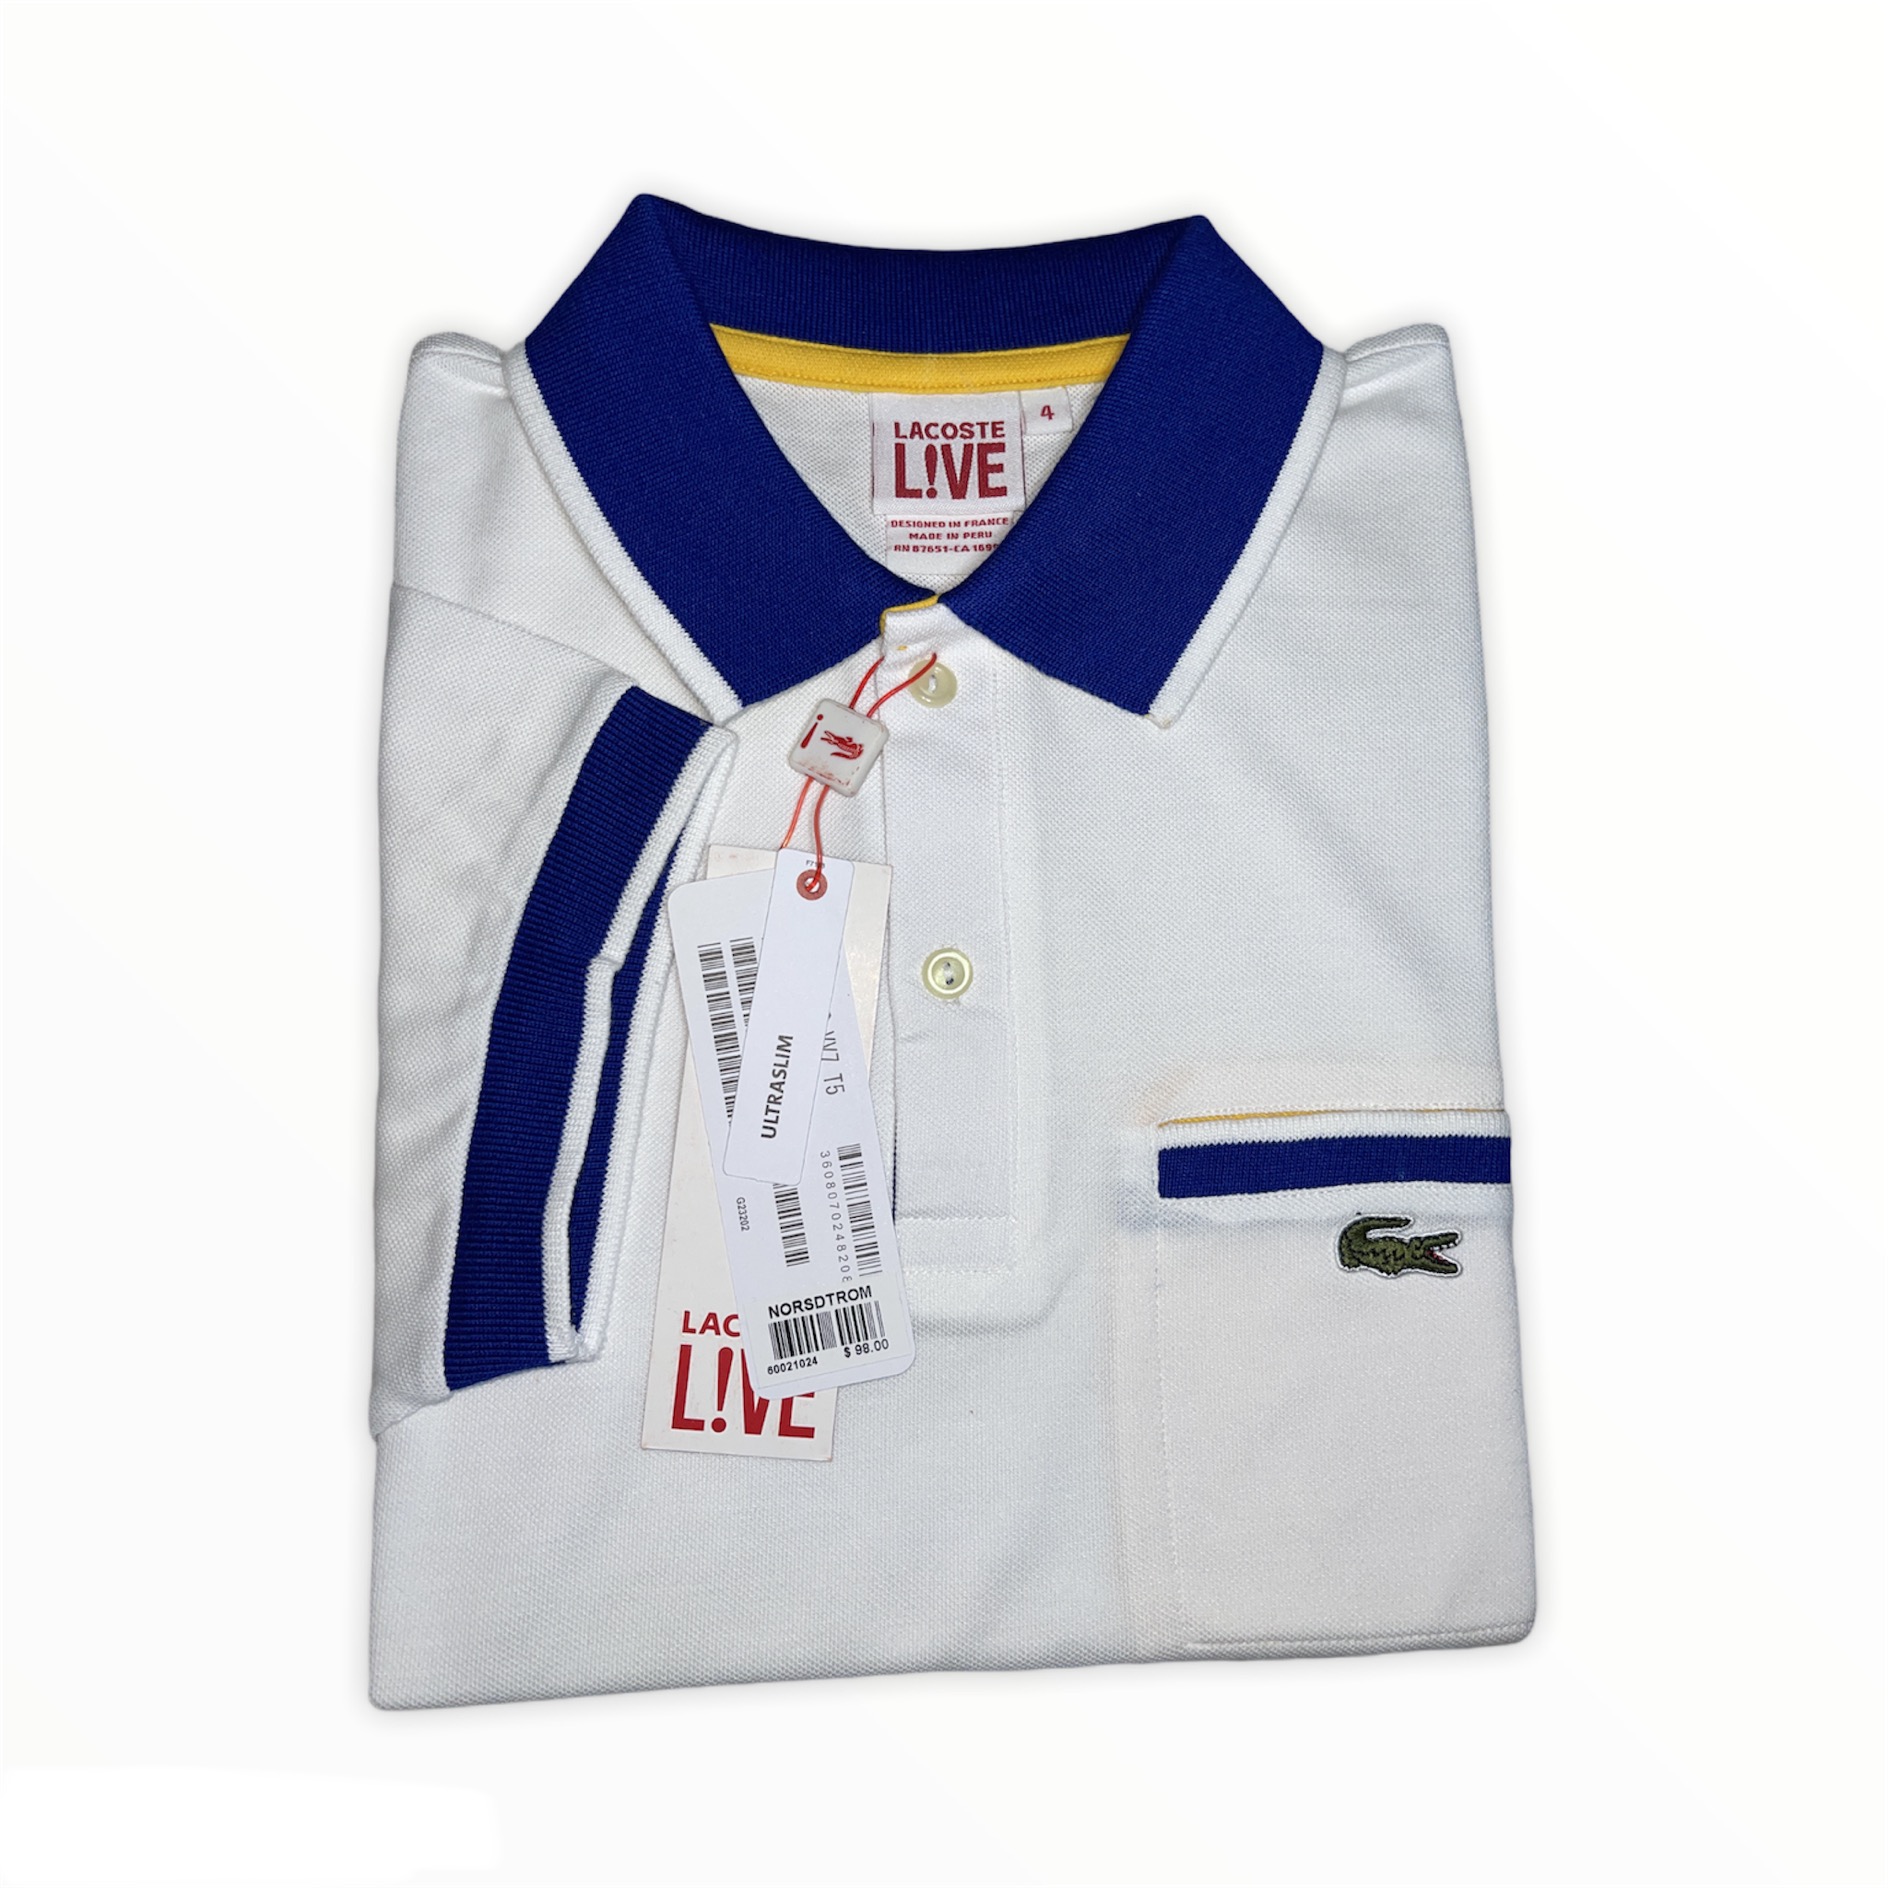 Lacoste LIVE Shirt for Lazada PH